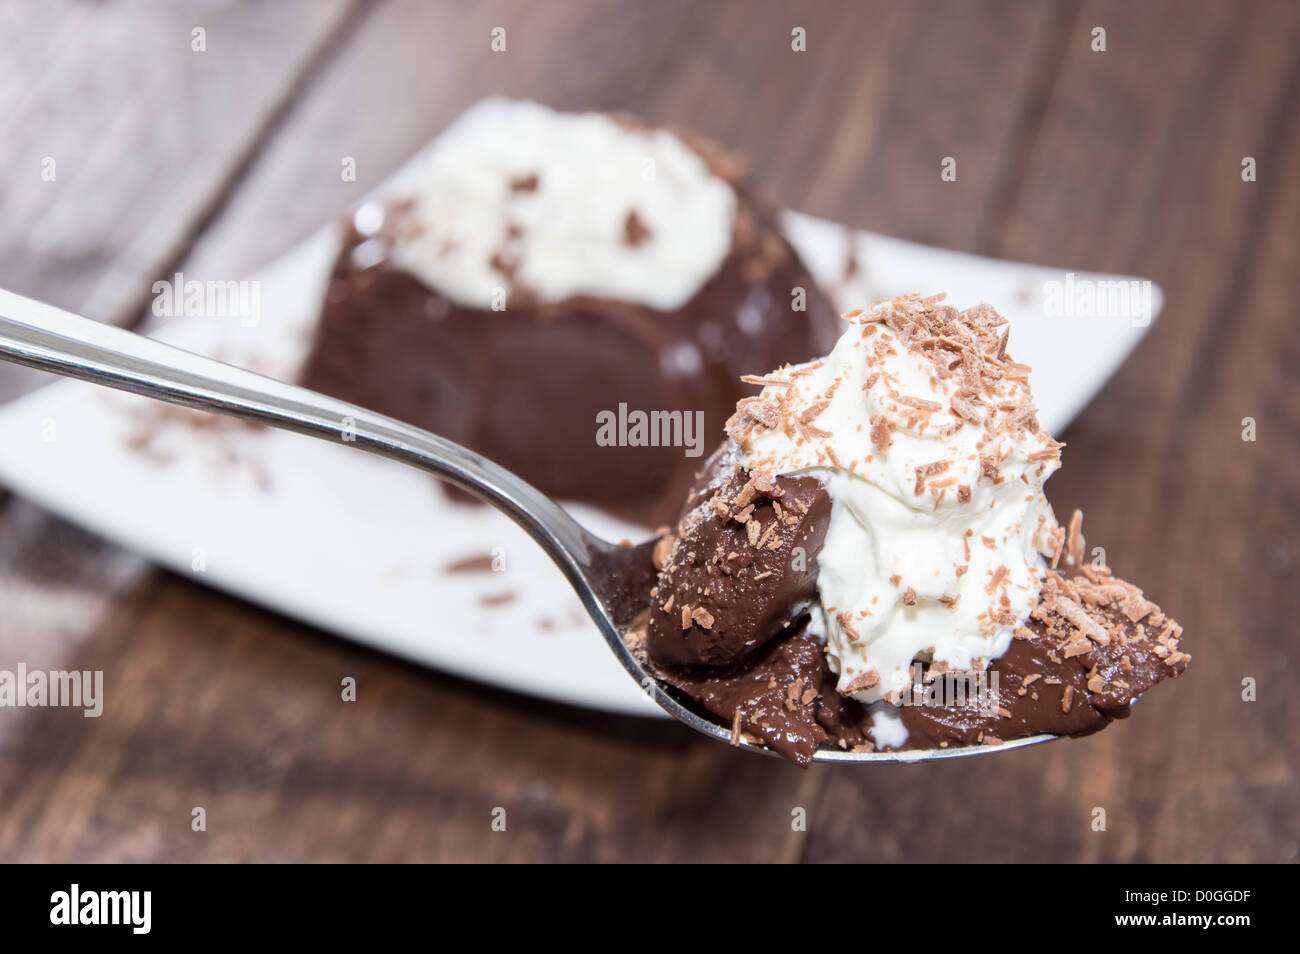 Portion of Chocolate Pudding on a small plate Stock Photo